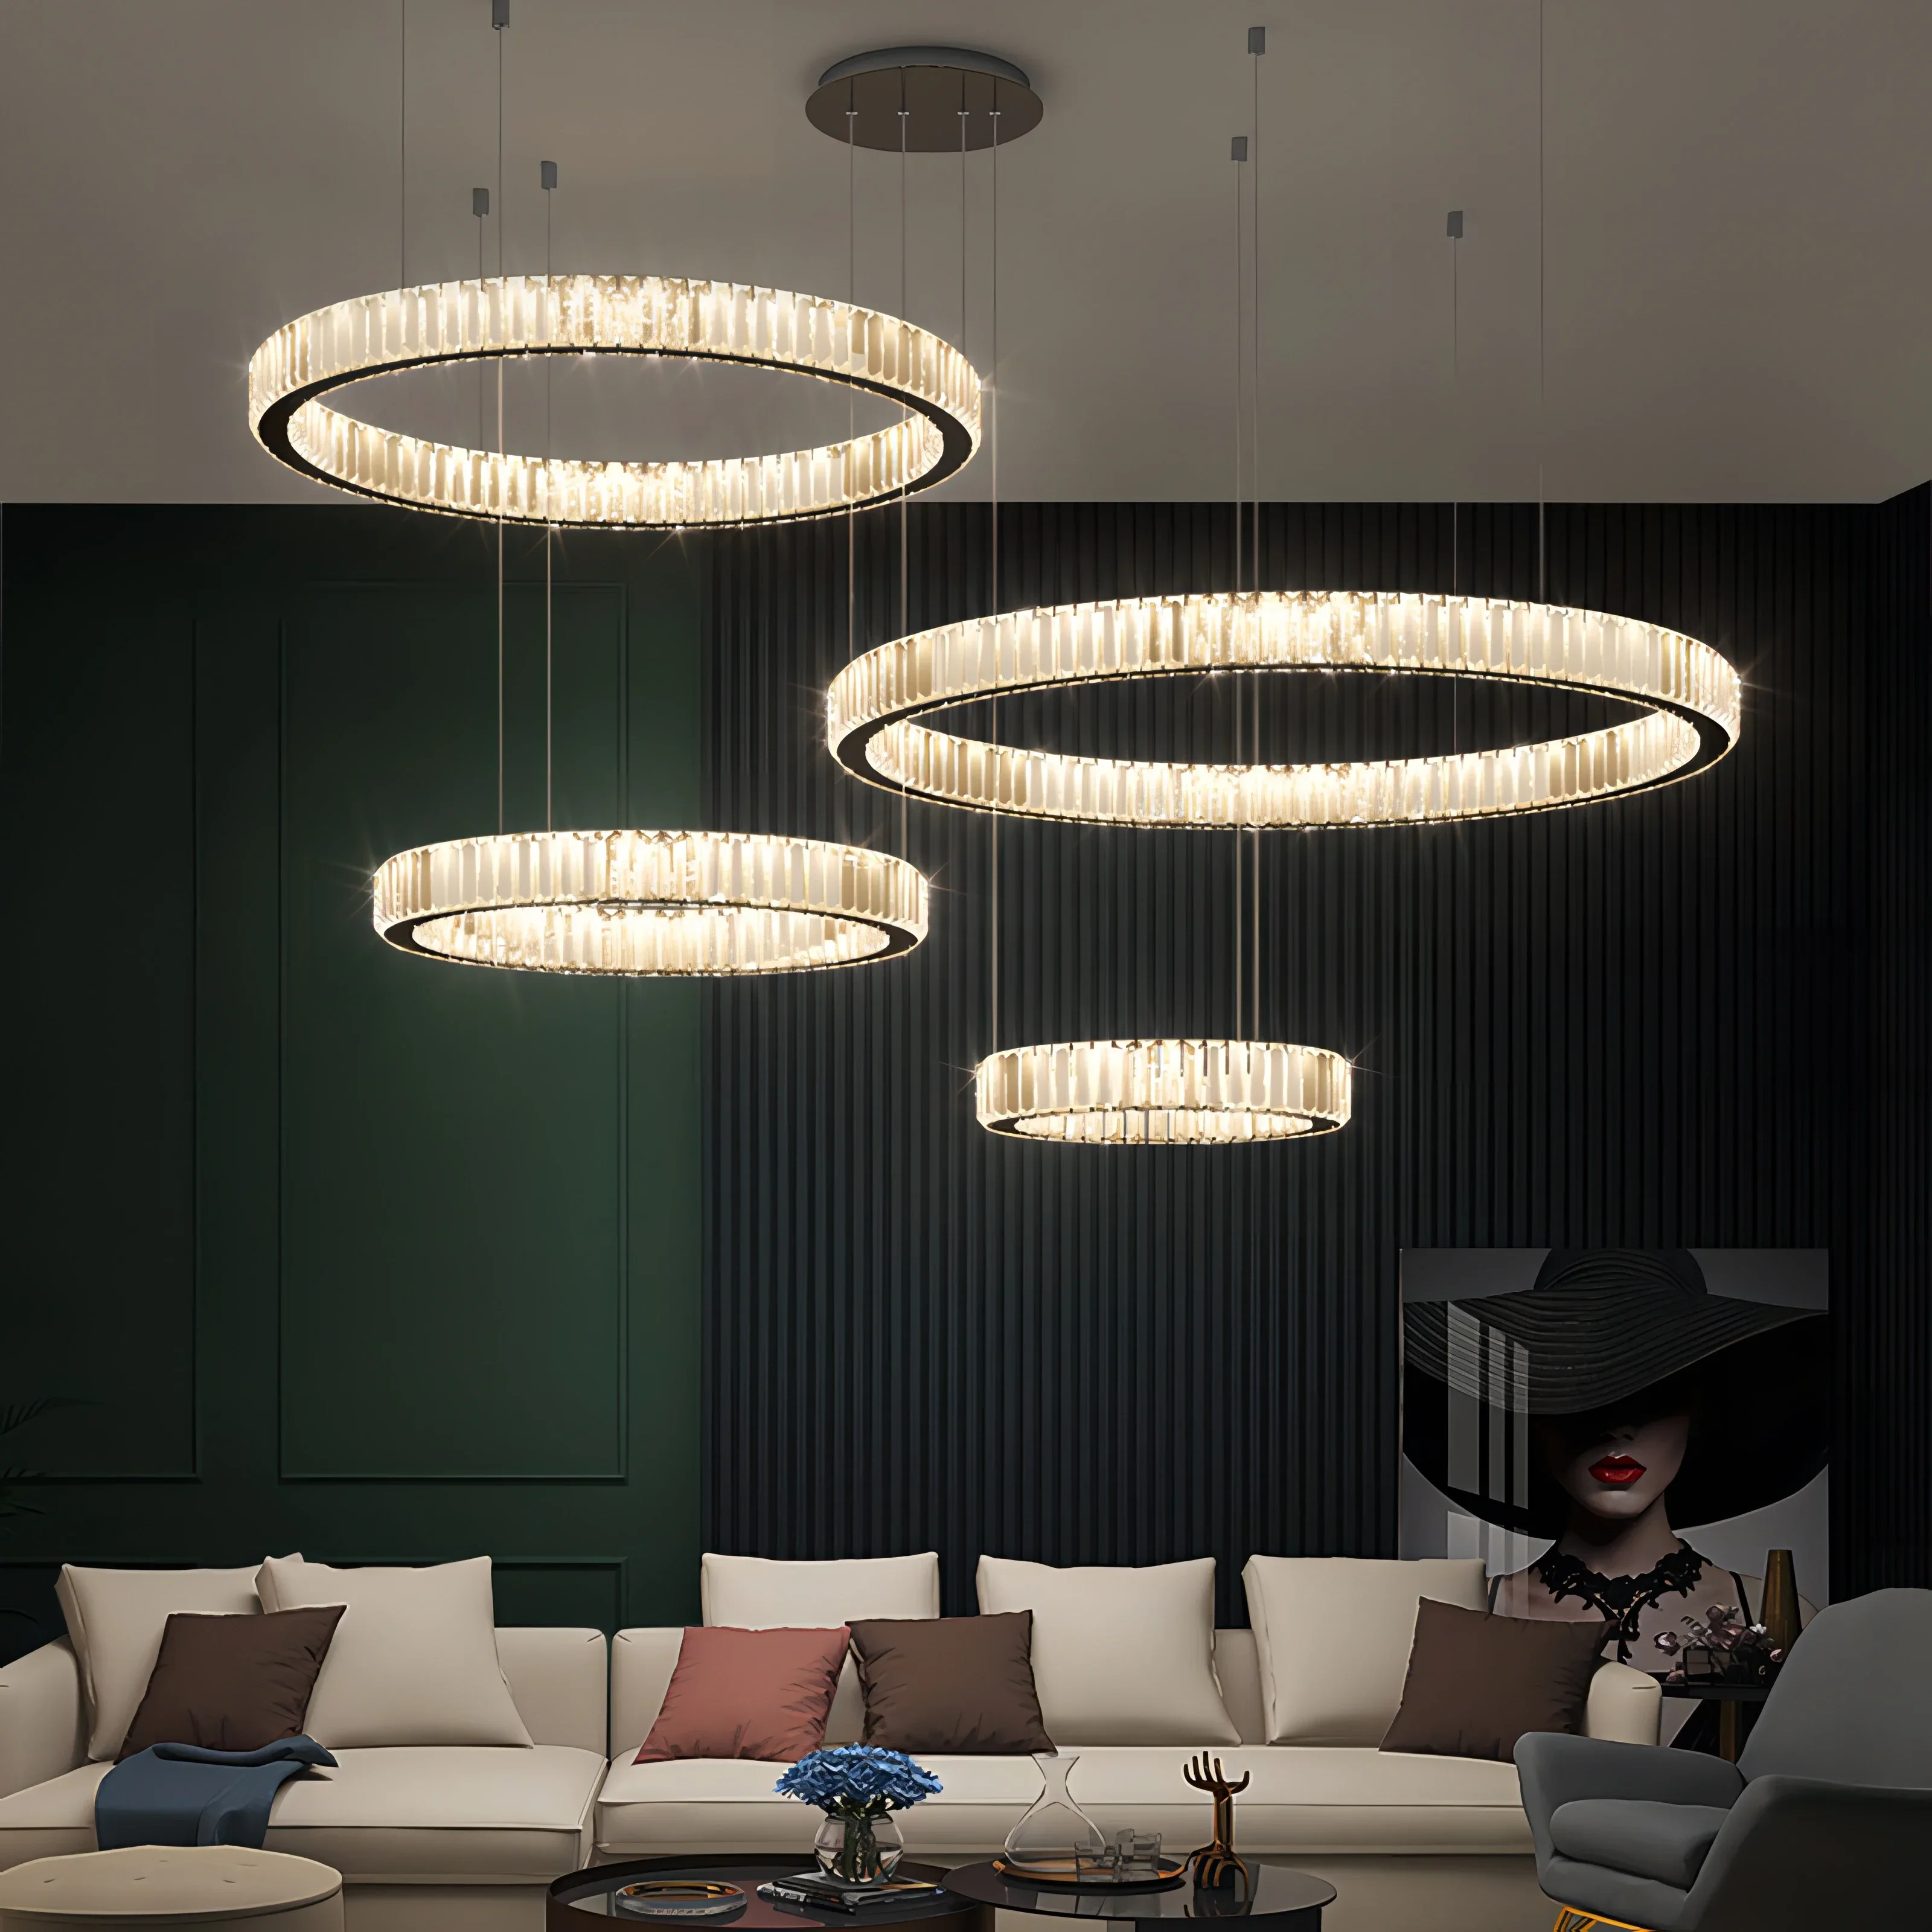 Ving room pendant lights dimmable crystal lustre steel rings led hanging lights fixture thumb200